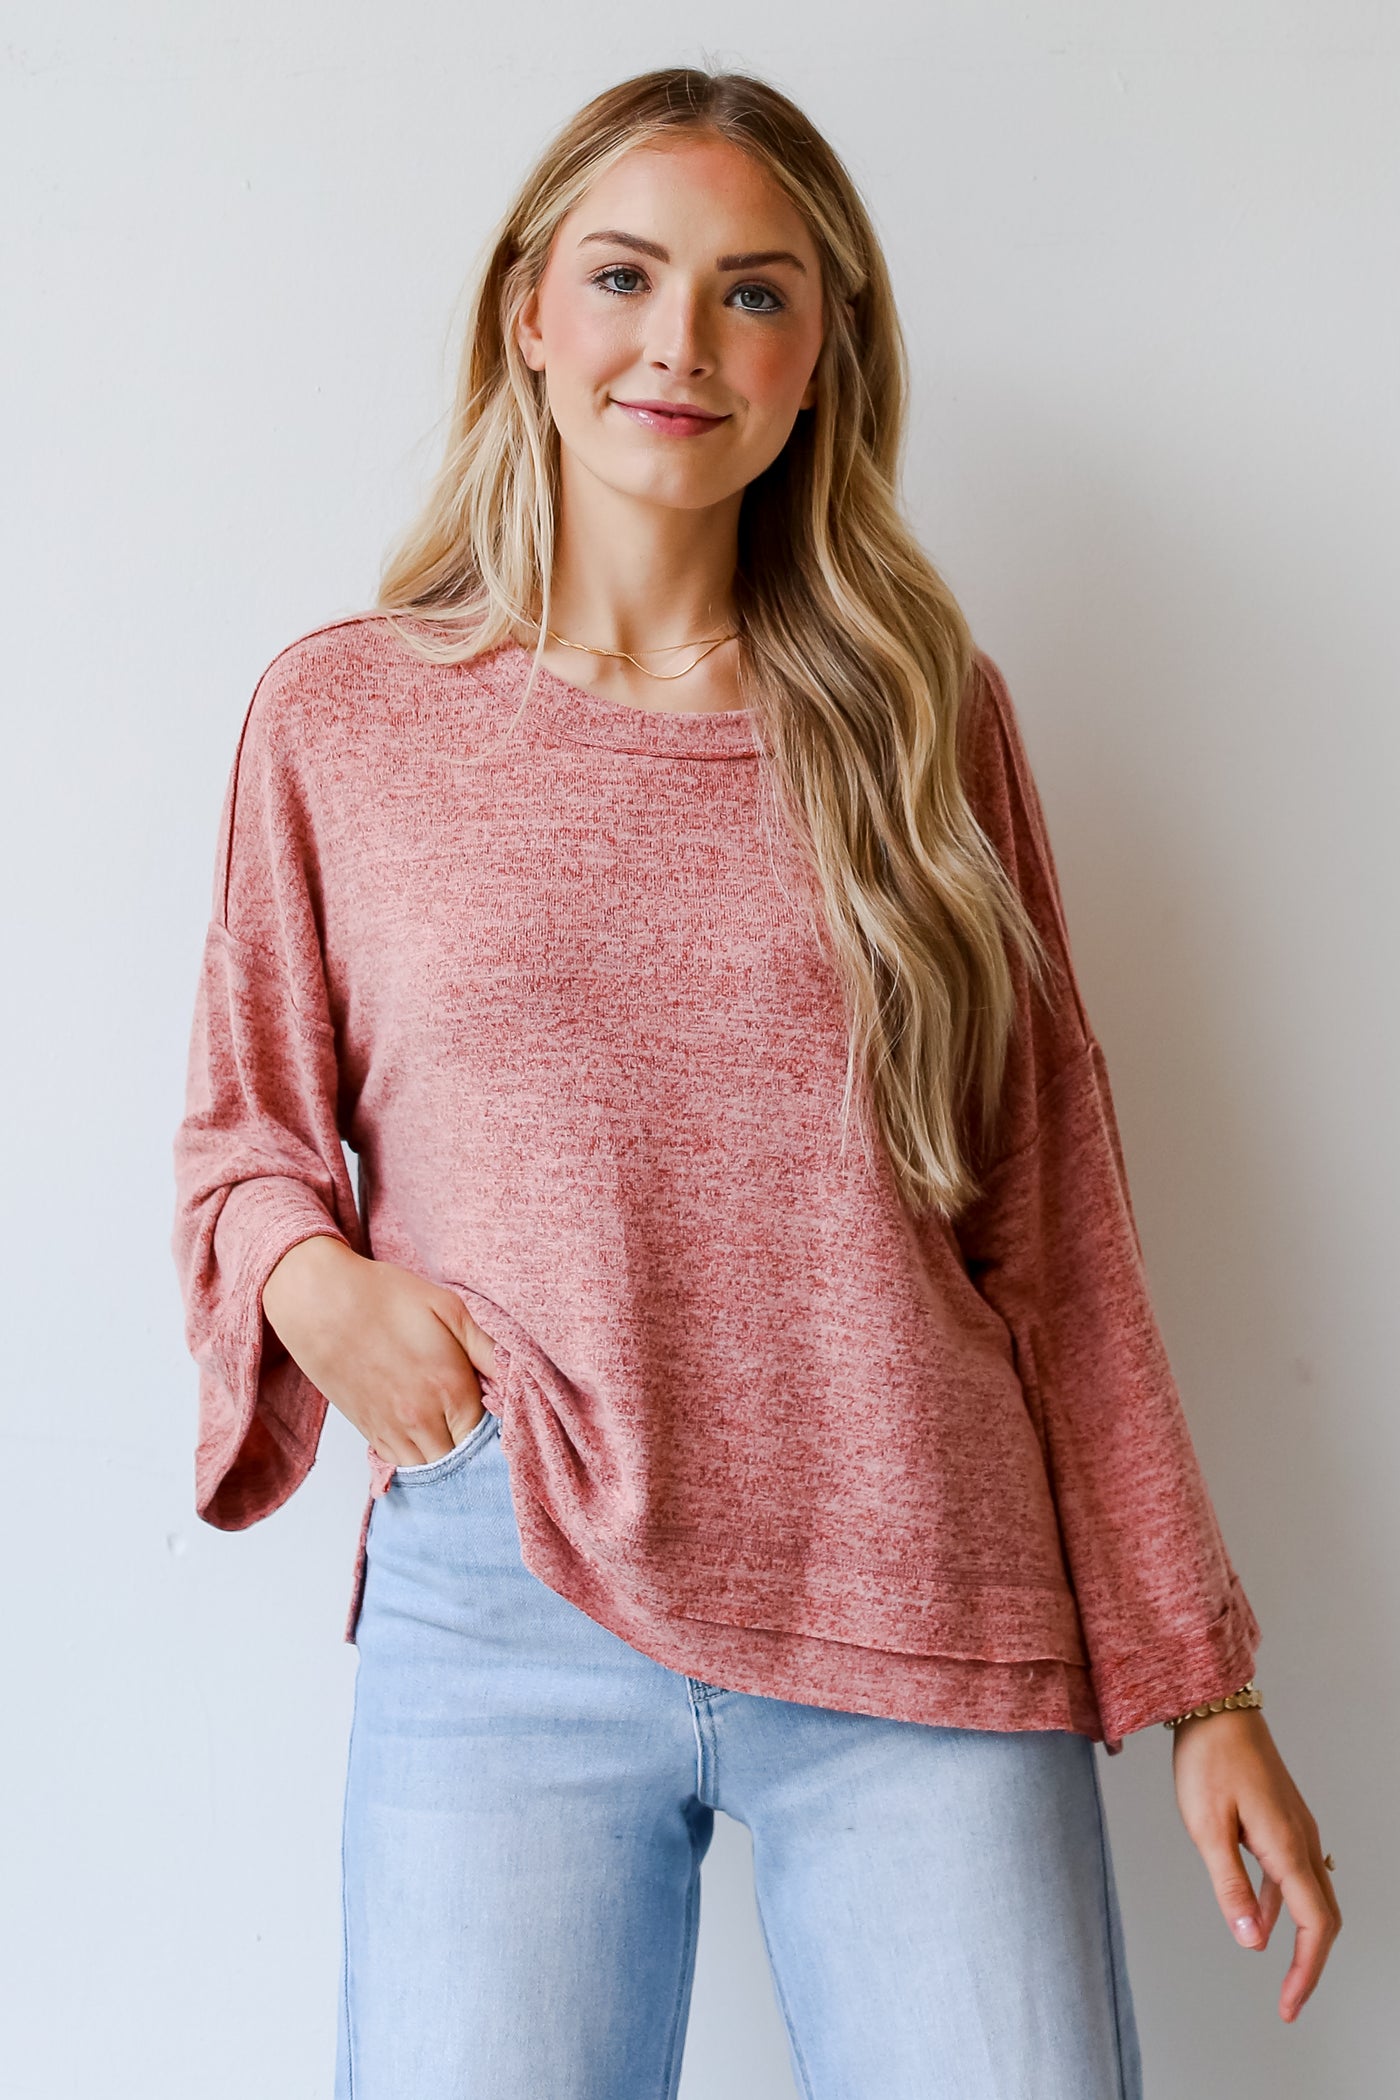 pink sweater on model